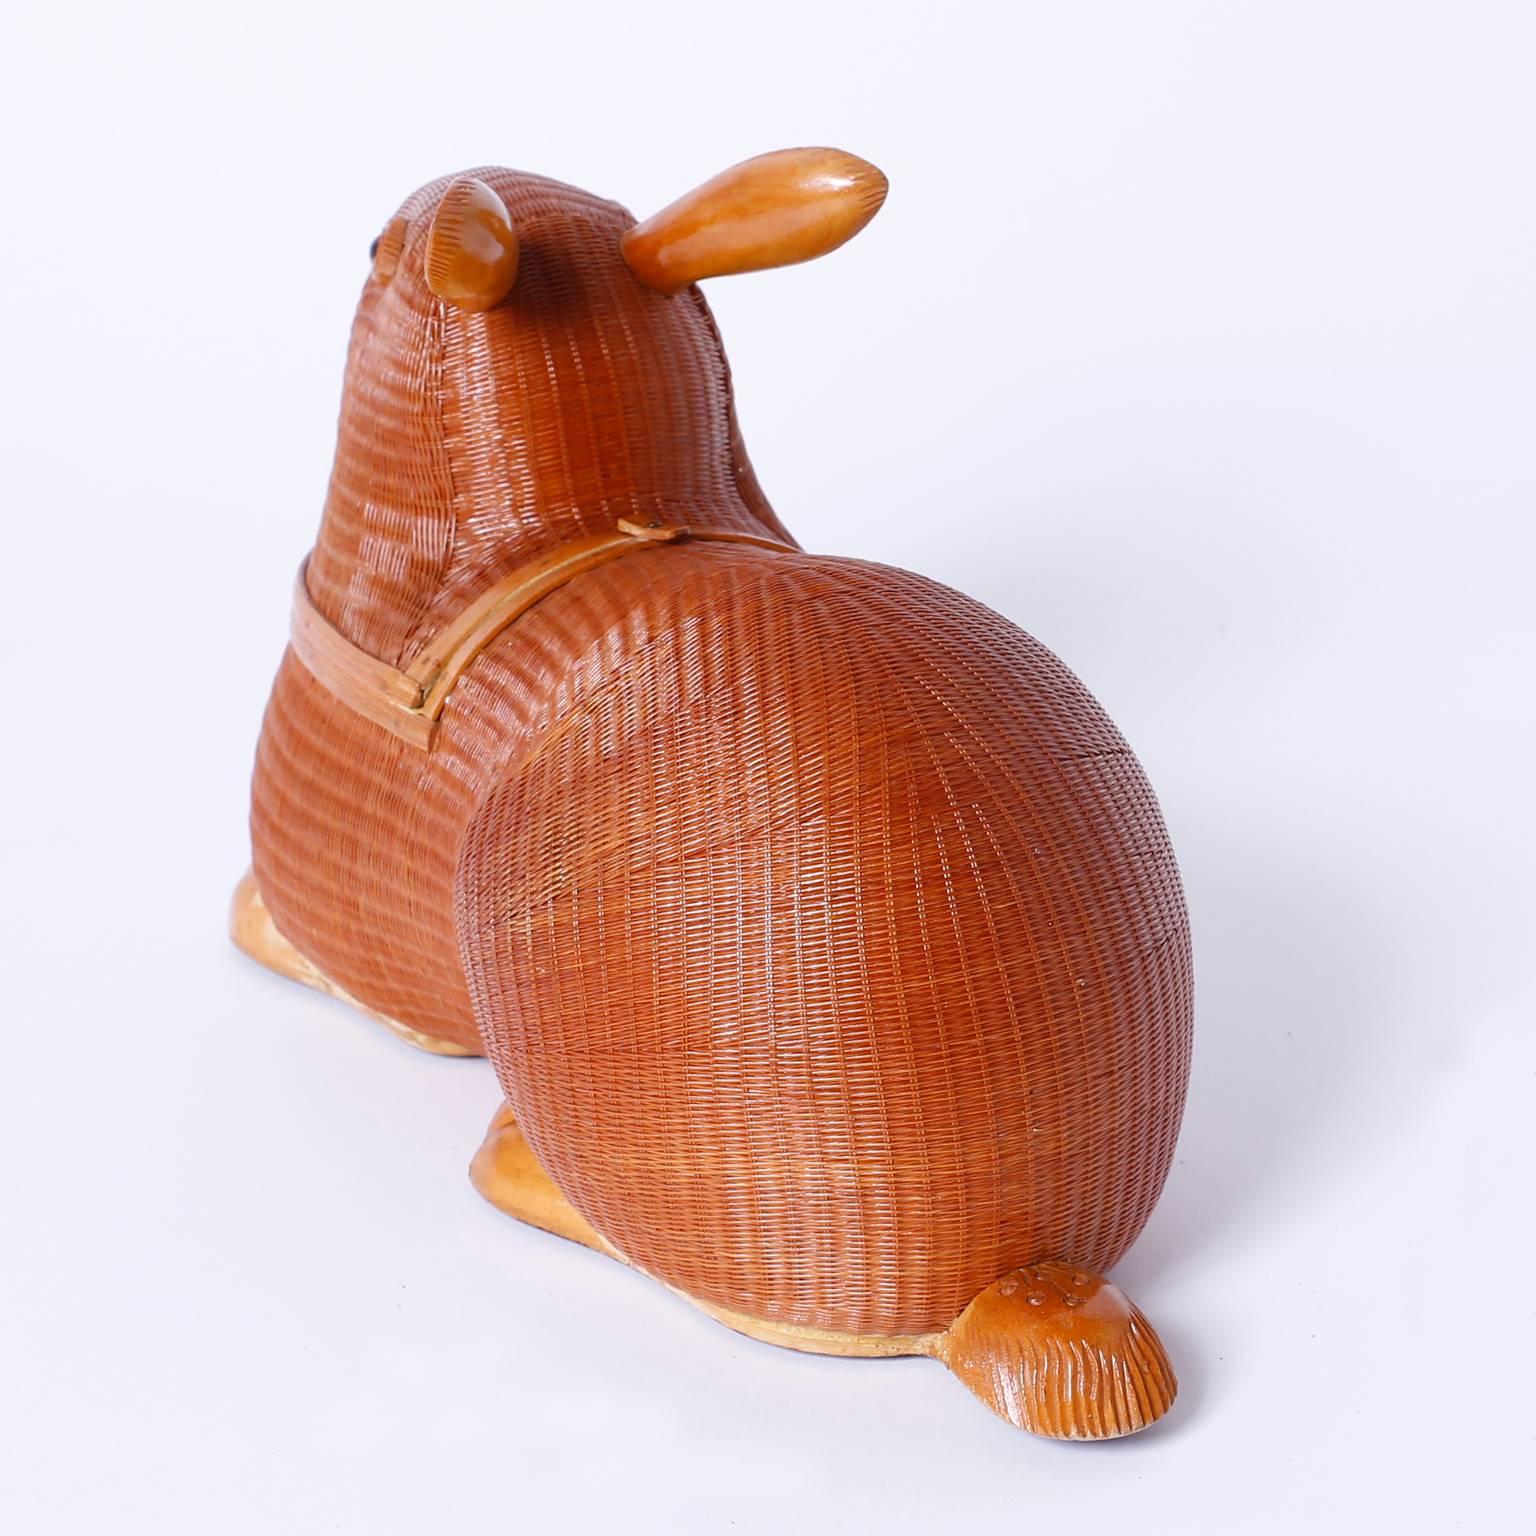 Chinese Mid-Century Wicker and Wood Rabbit Sculpture or Box